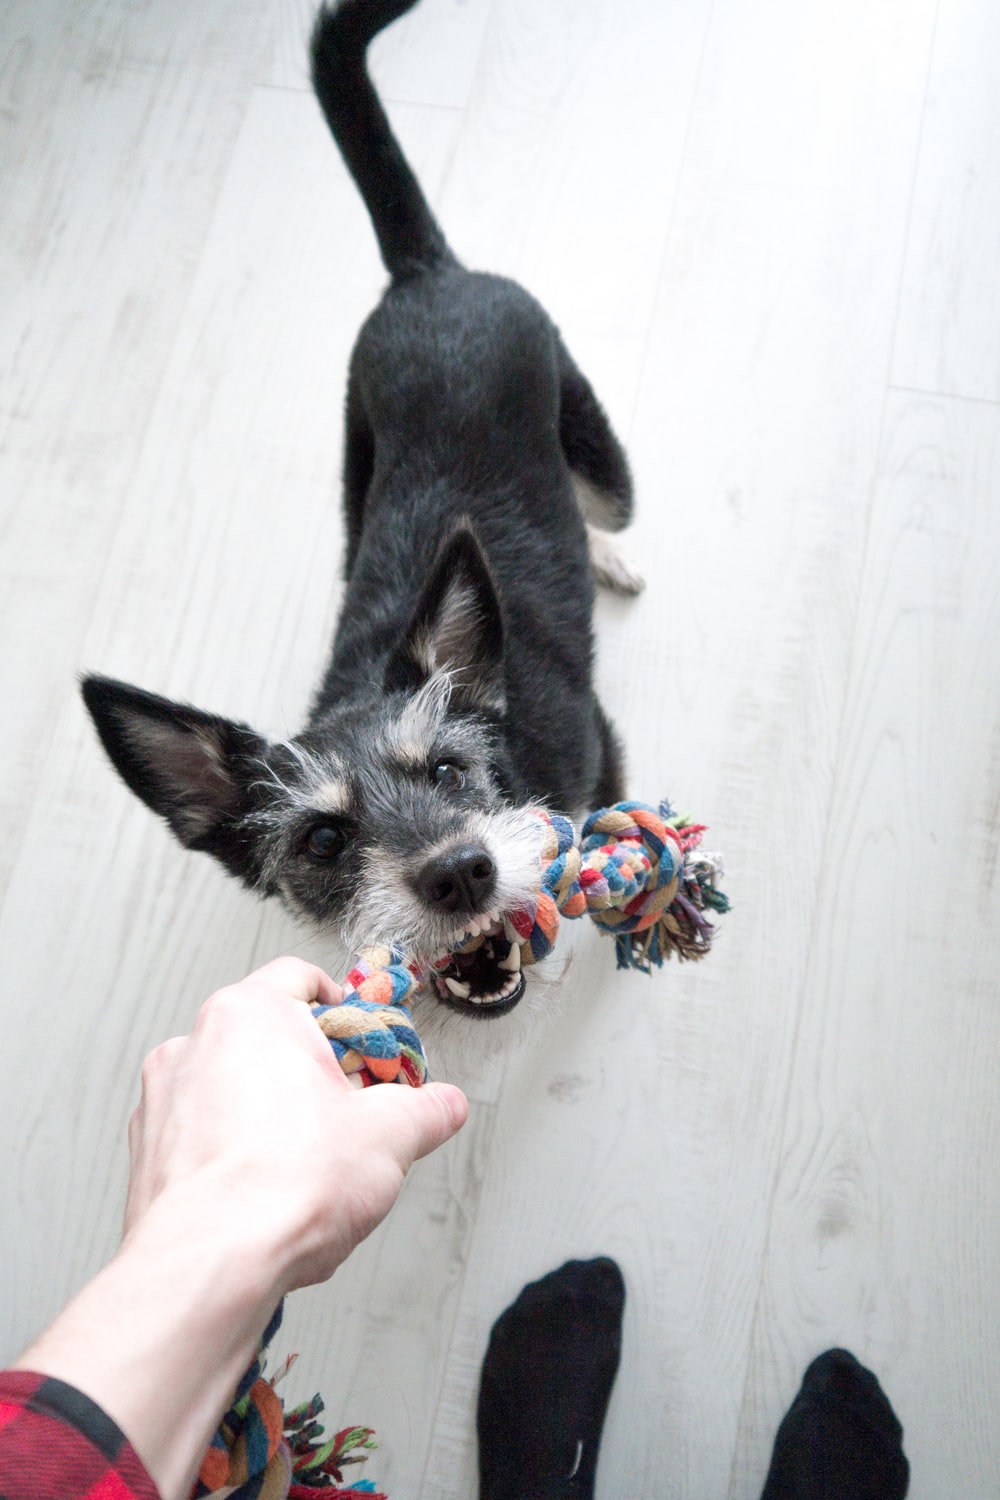 A game of tug of war being played using a tug toy.